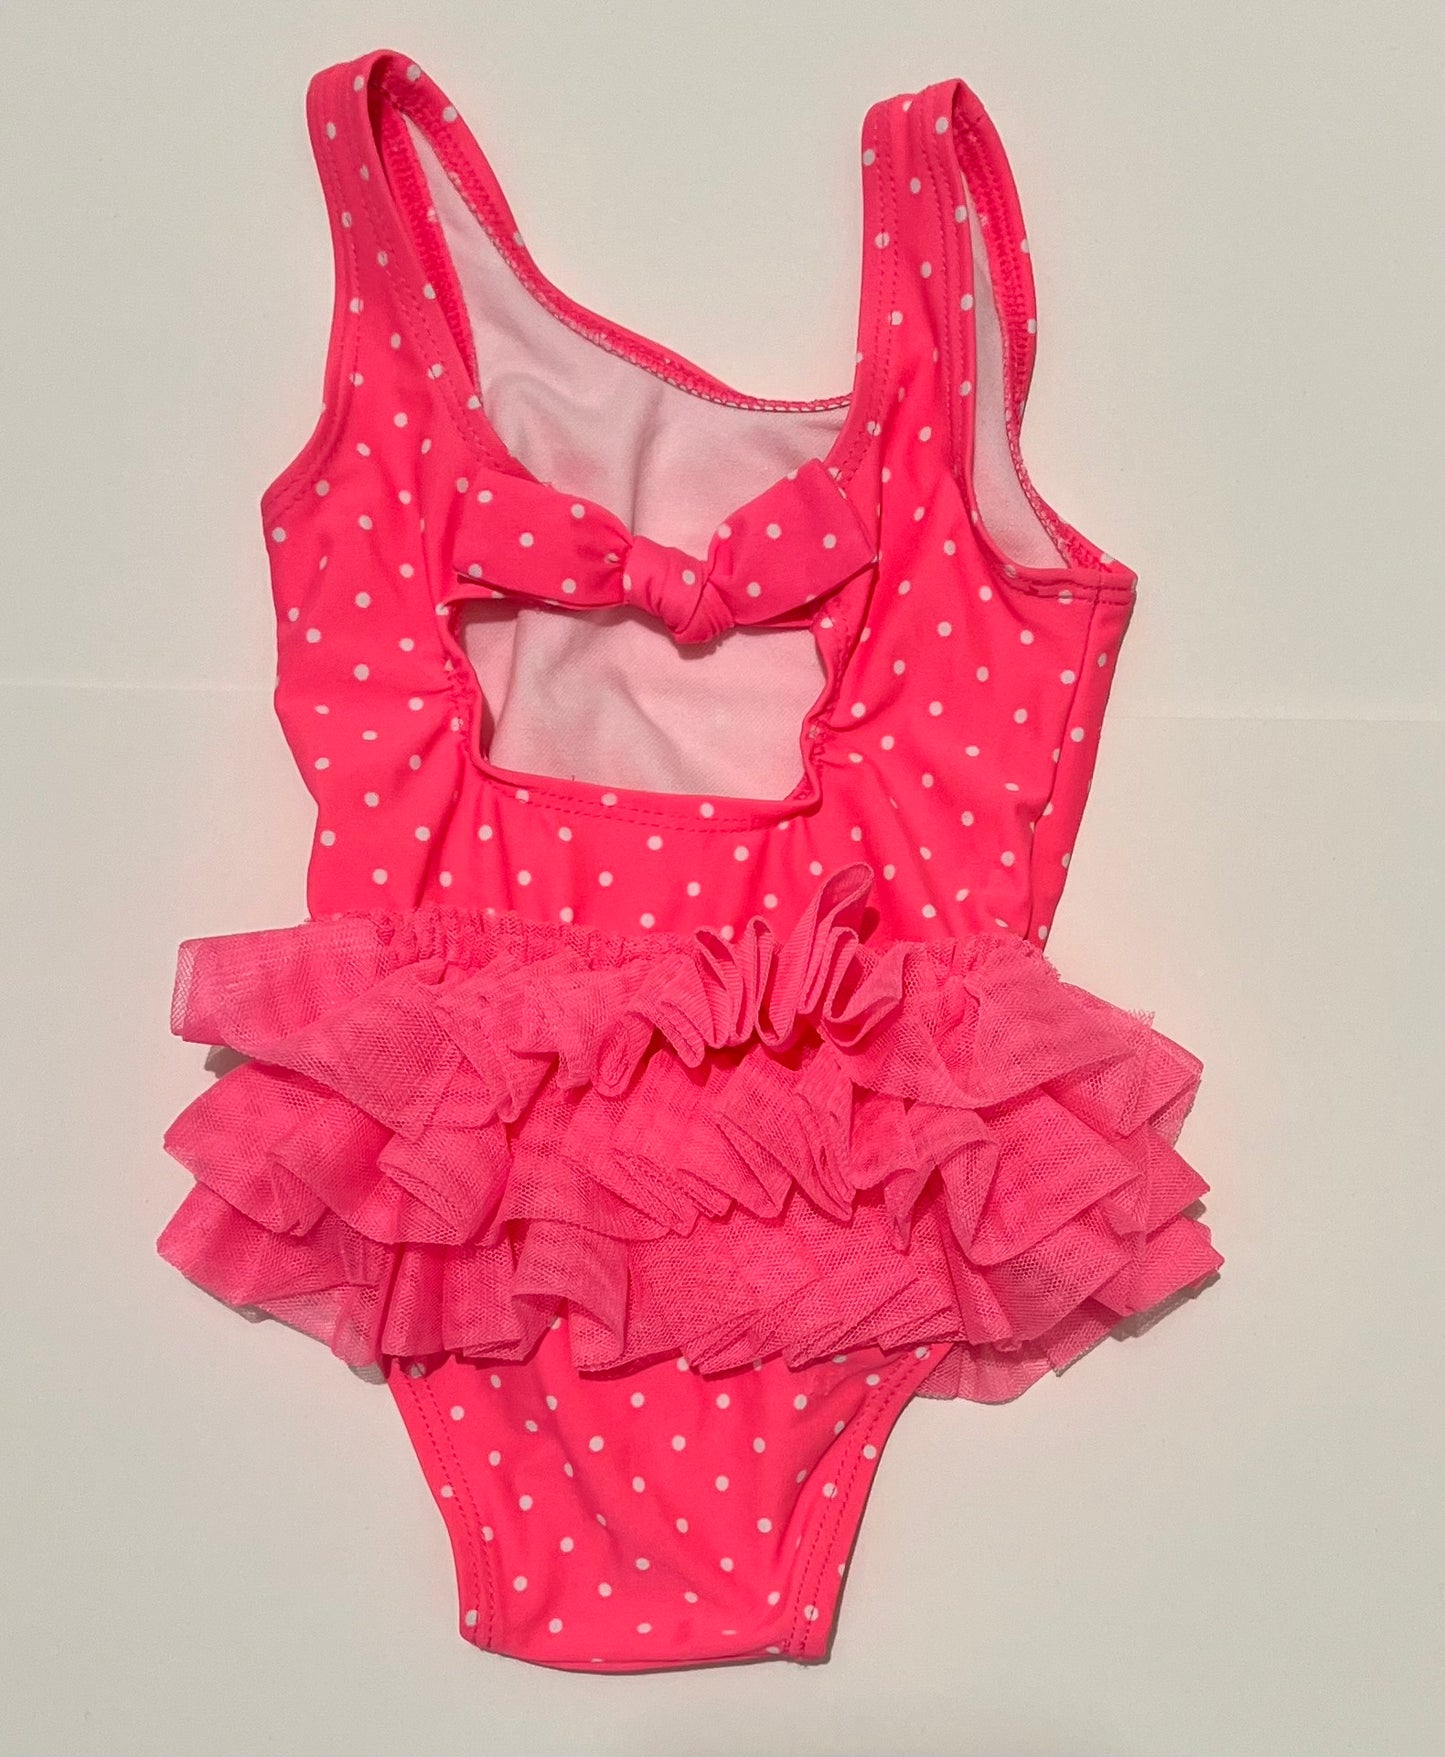 Bathing Suit Girls 9 months Pink Polka Dots with Ruffle Skirt